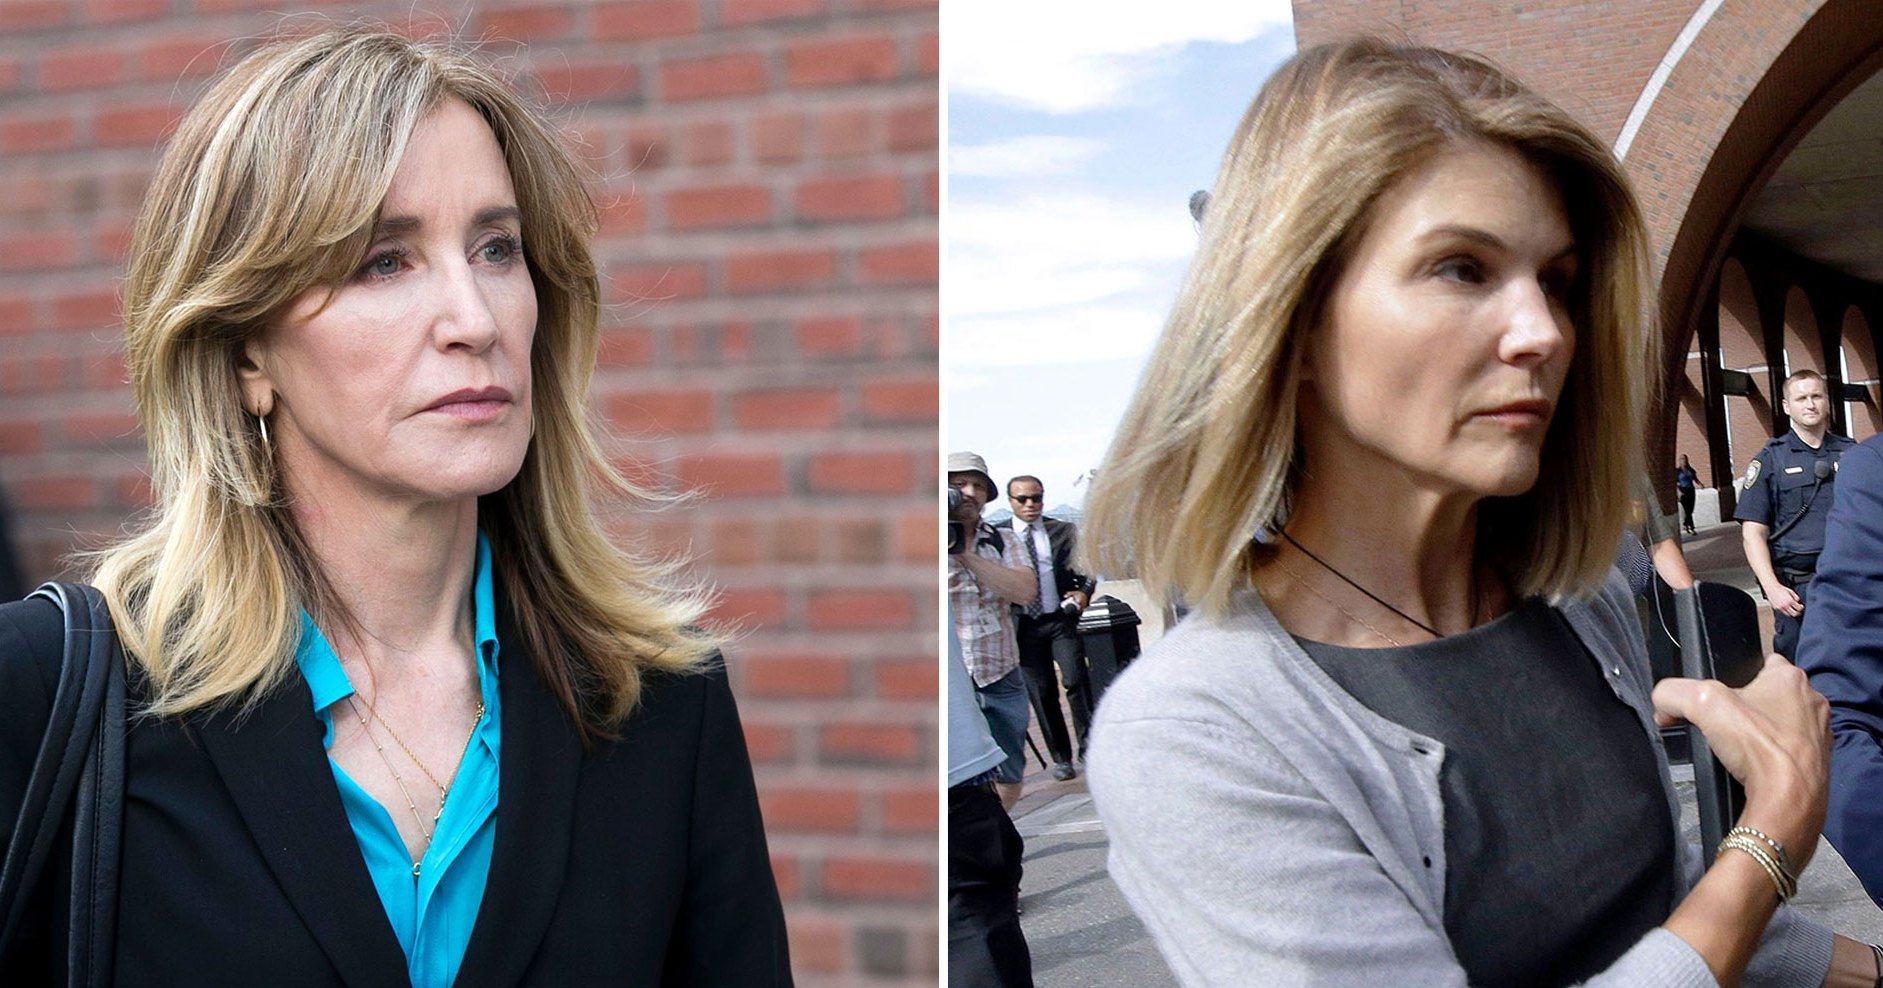 Two Years After the College Admissions Scandal: Where Are They Now?